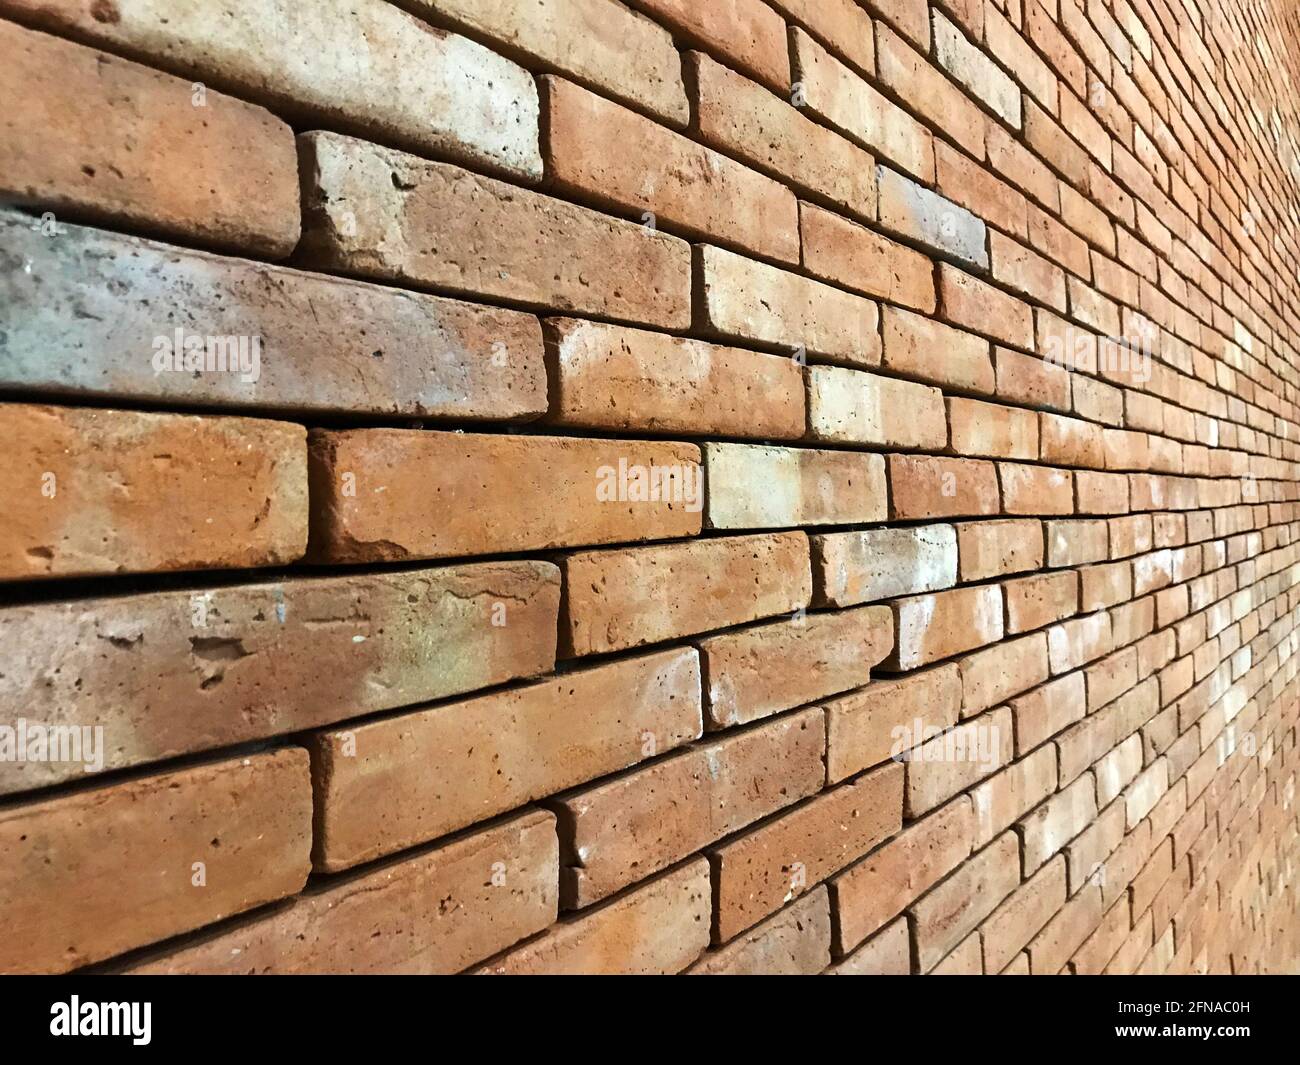 Red brick wall perspective view Stock Photo